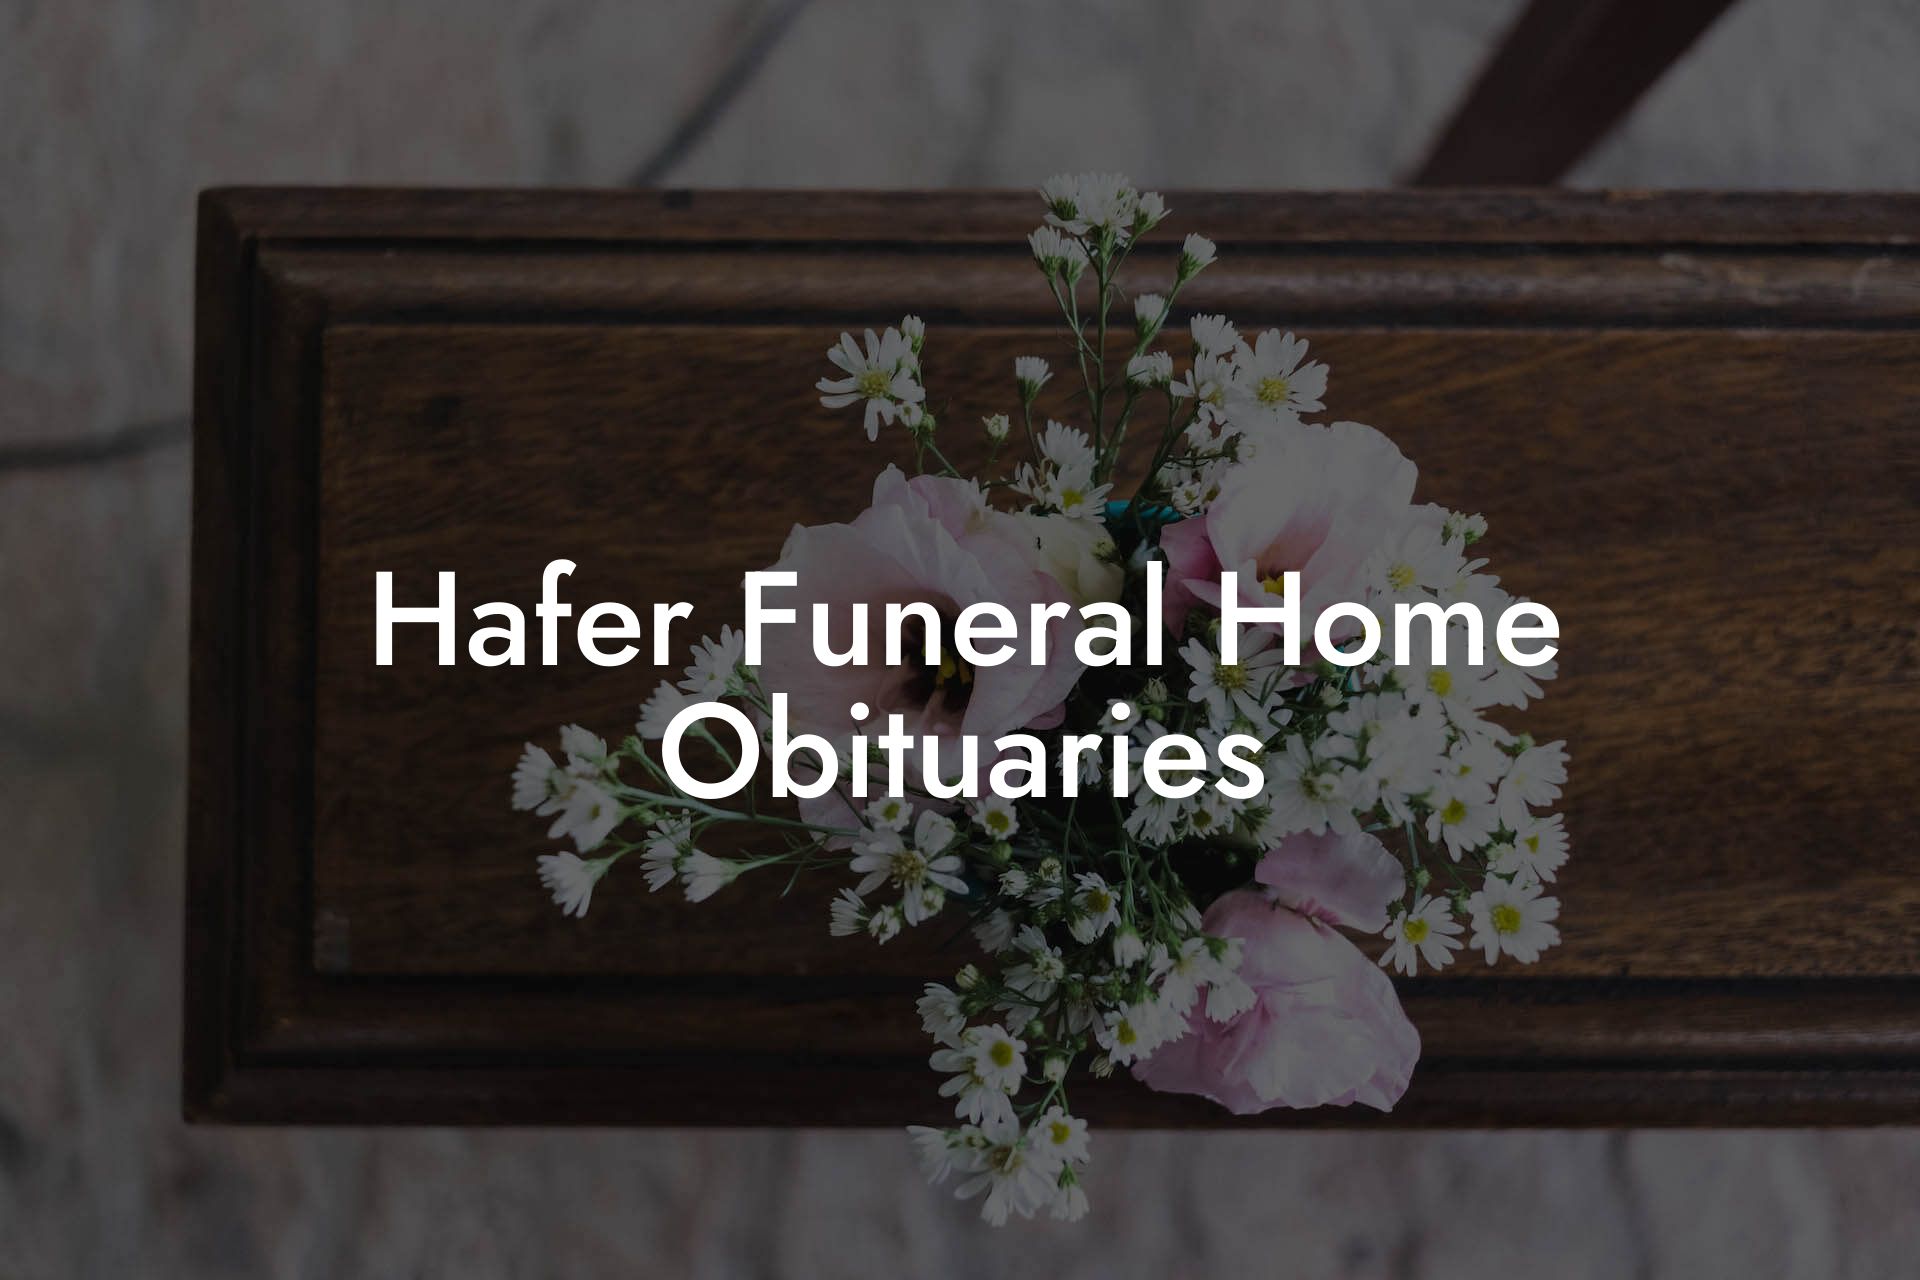 Hafer Funeral Home Obituaries